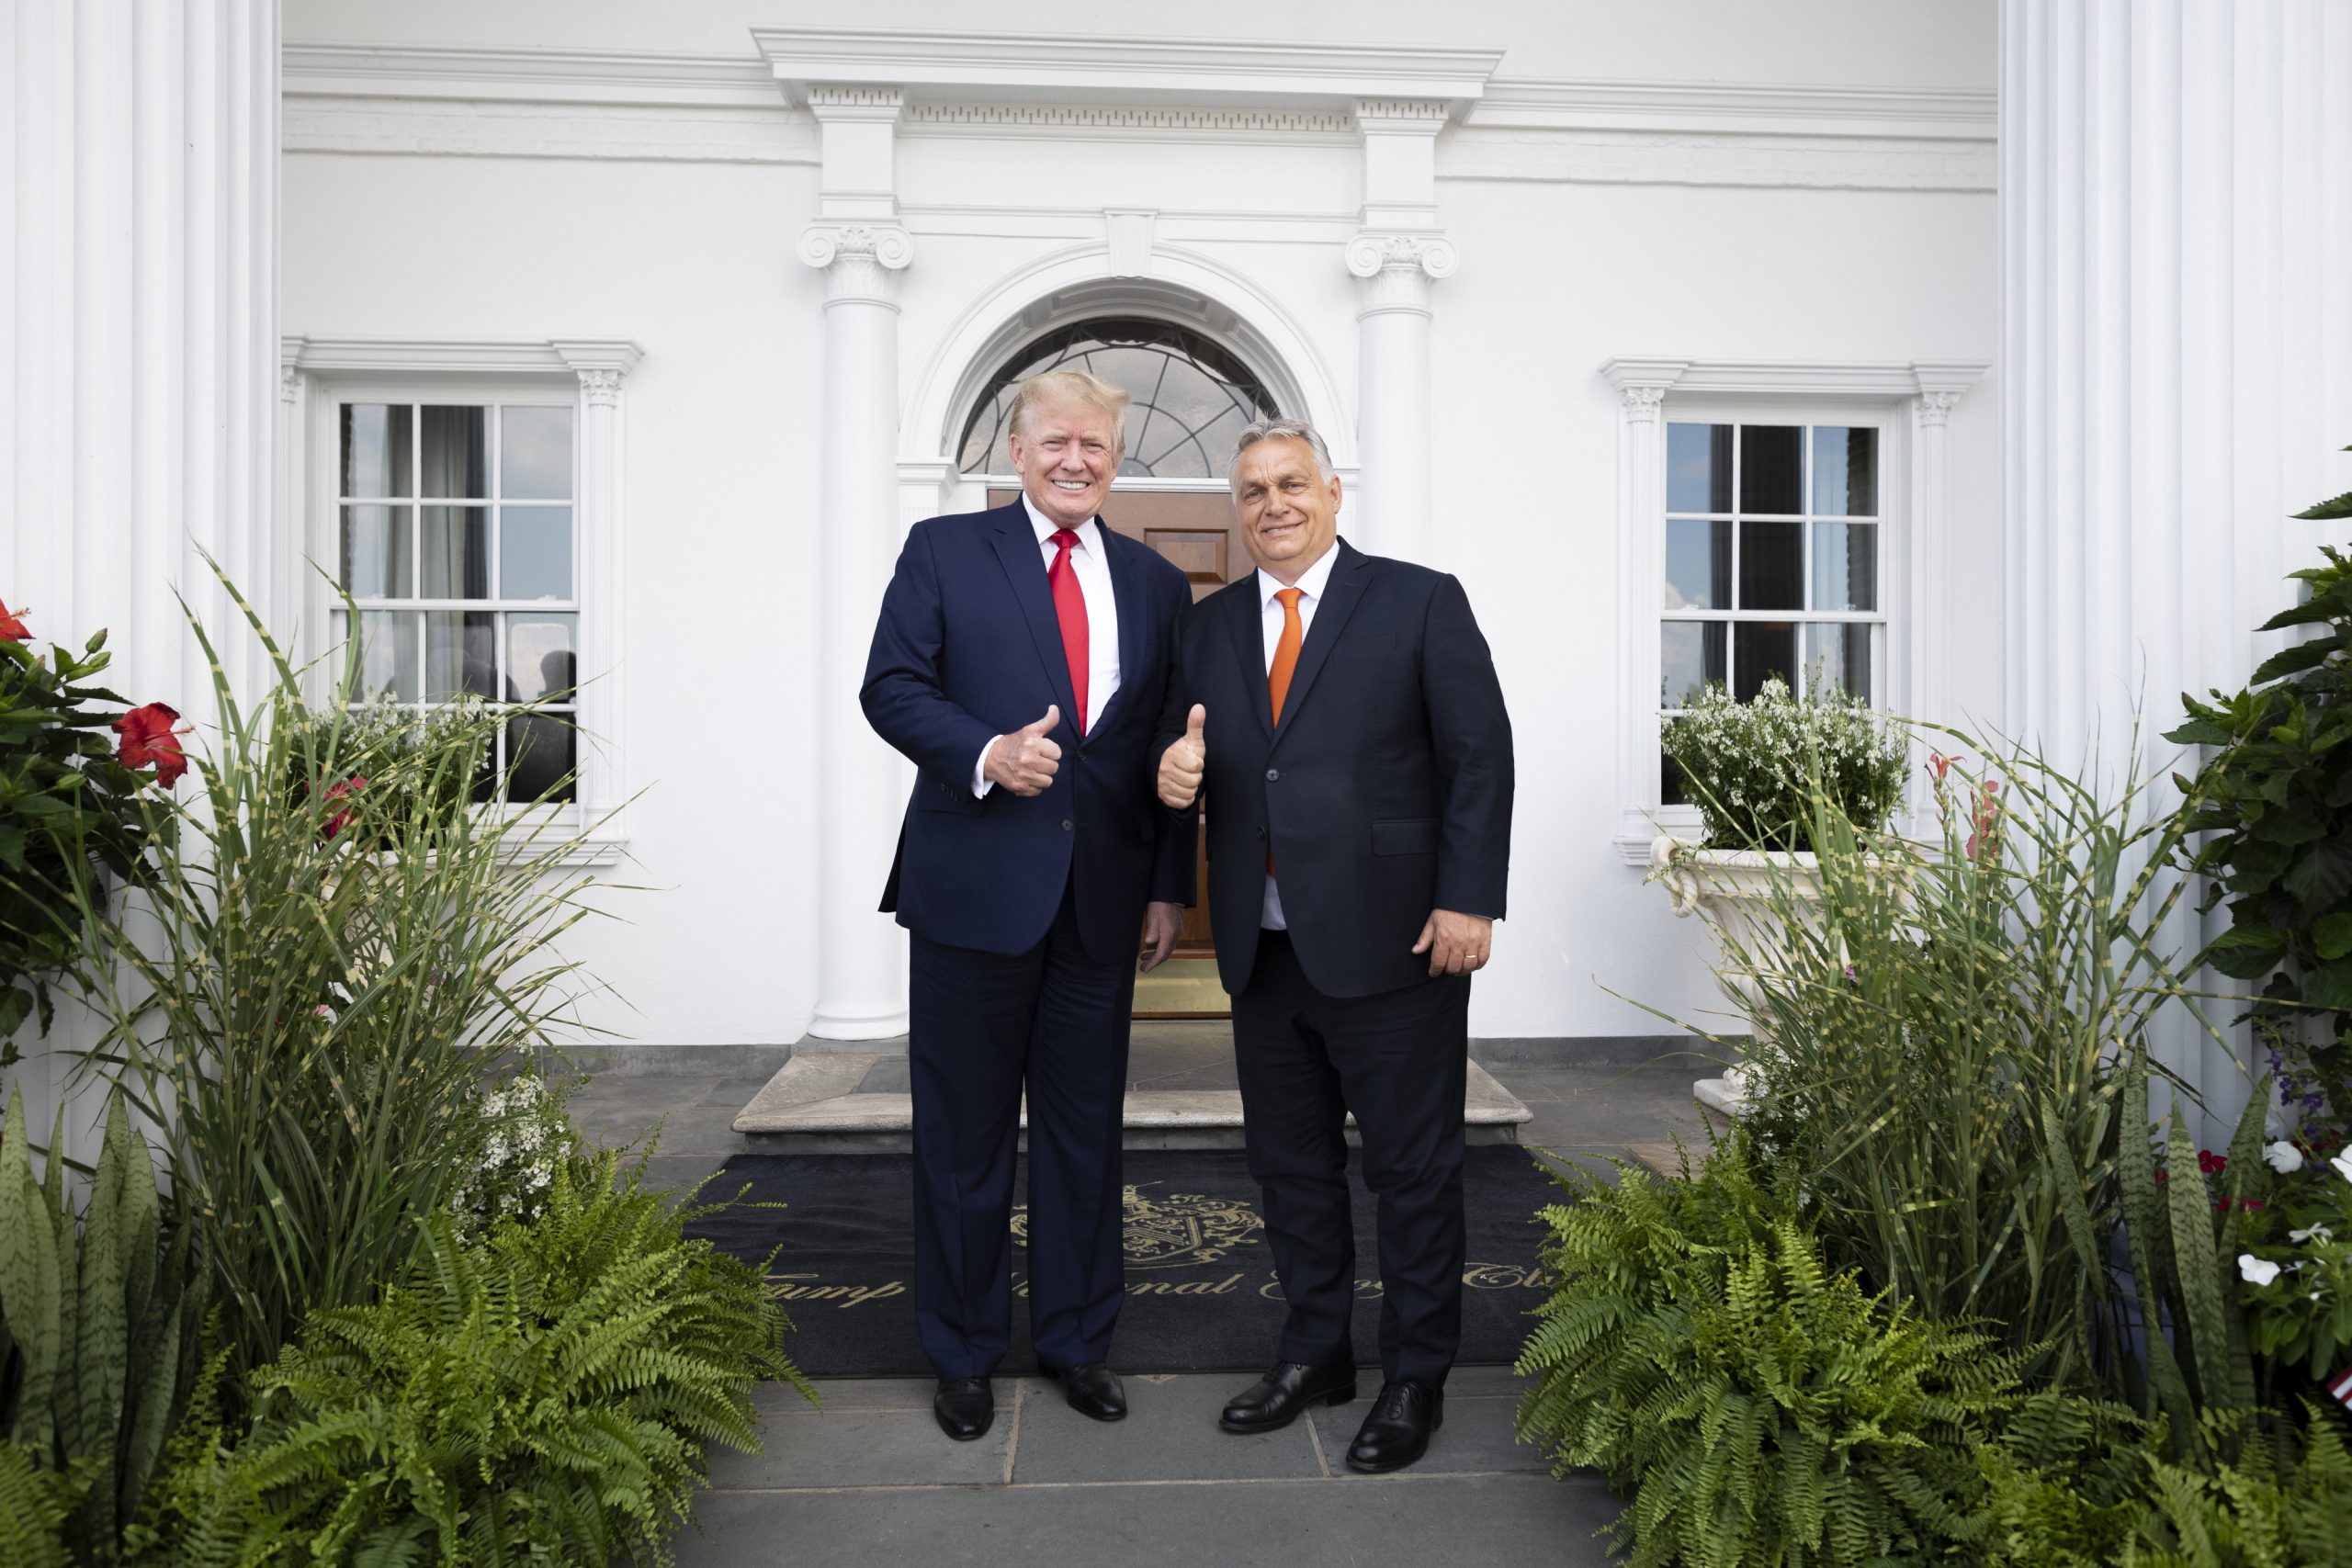 Victor Orban meets with Donald Trump in the US